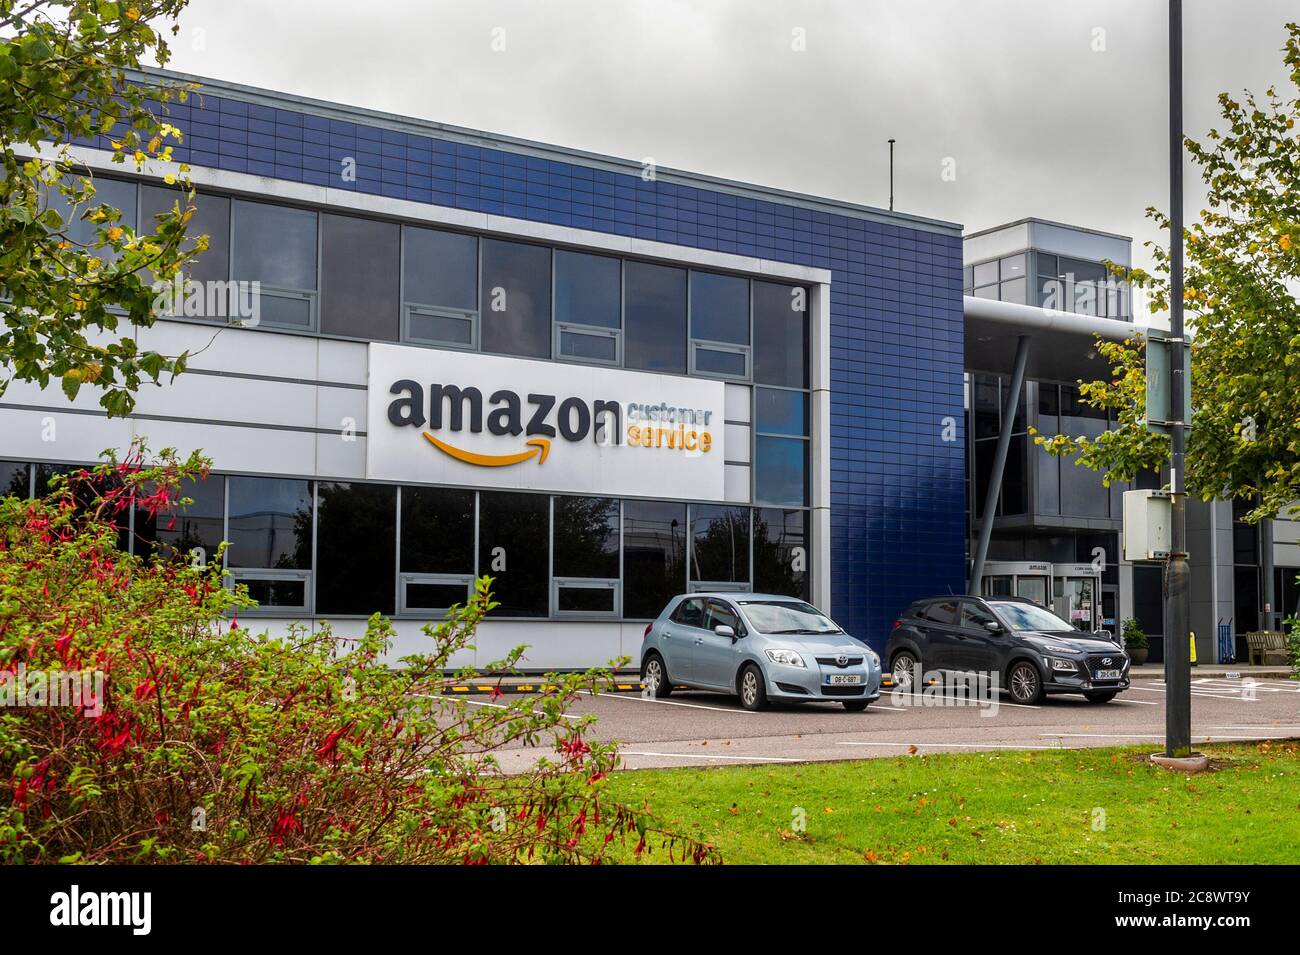 Cork, Ireland. 27th July, 2020. Amazon has announced it is going to create 1,000 additional jobs in Cork and Dublin. The positions will be created over the next two years bringing the Irish workforce to 5,000. Credit: AG News/Alamy Live News Stock Photo